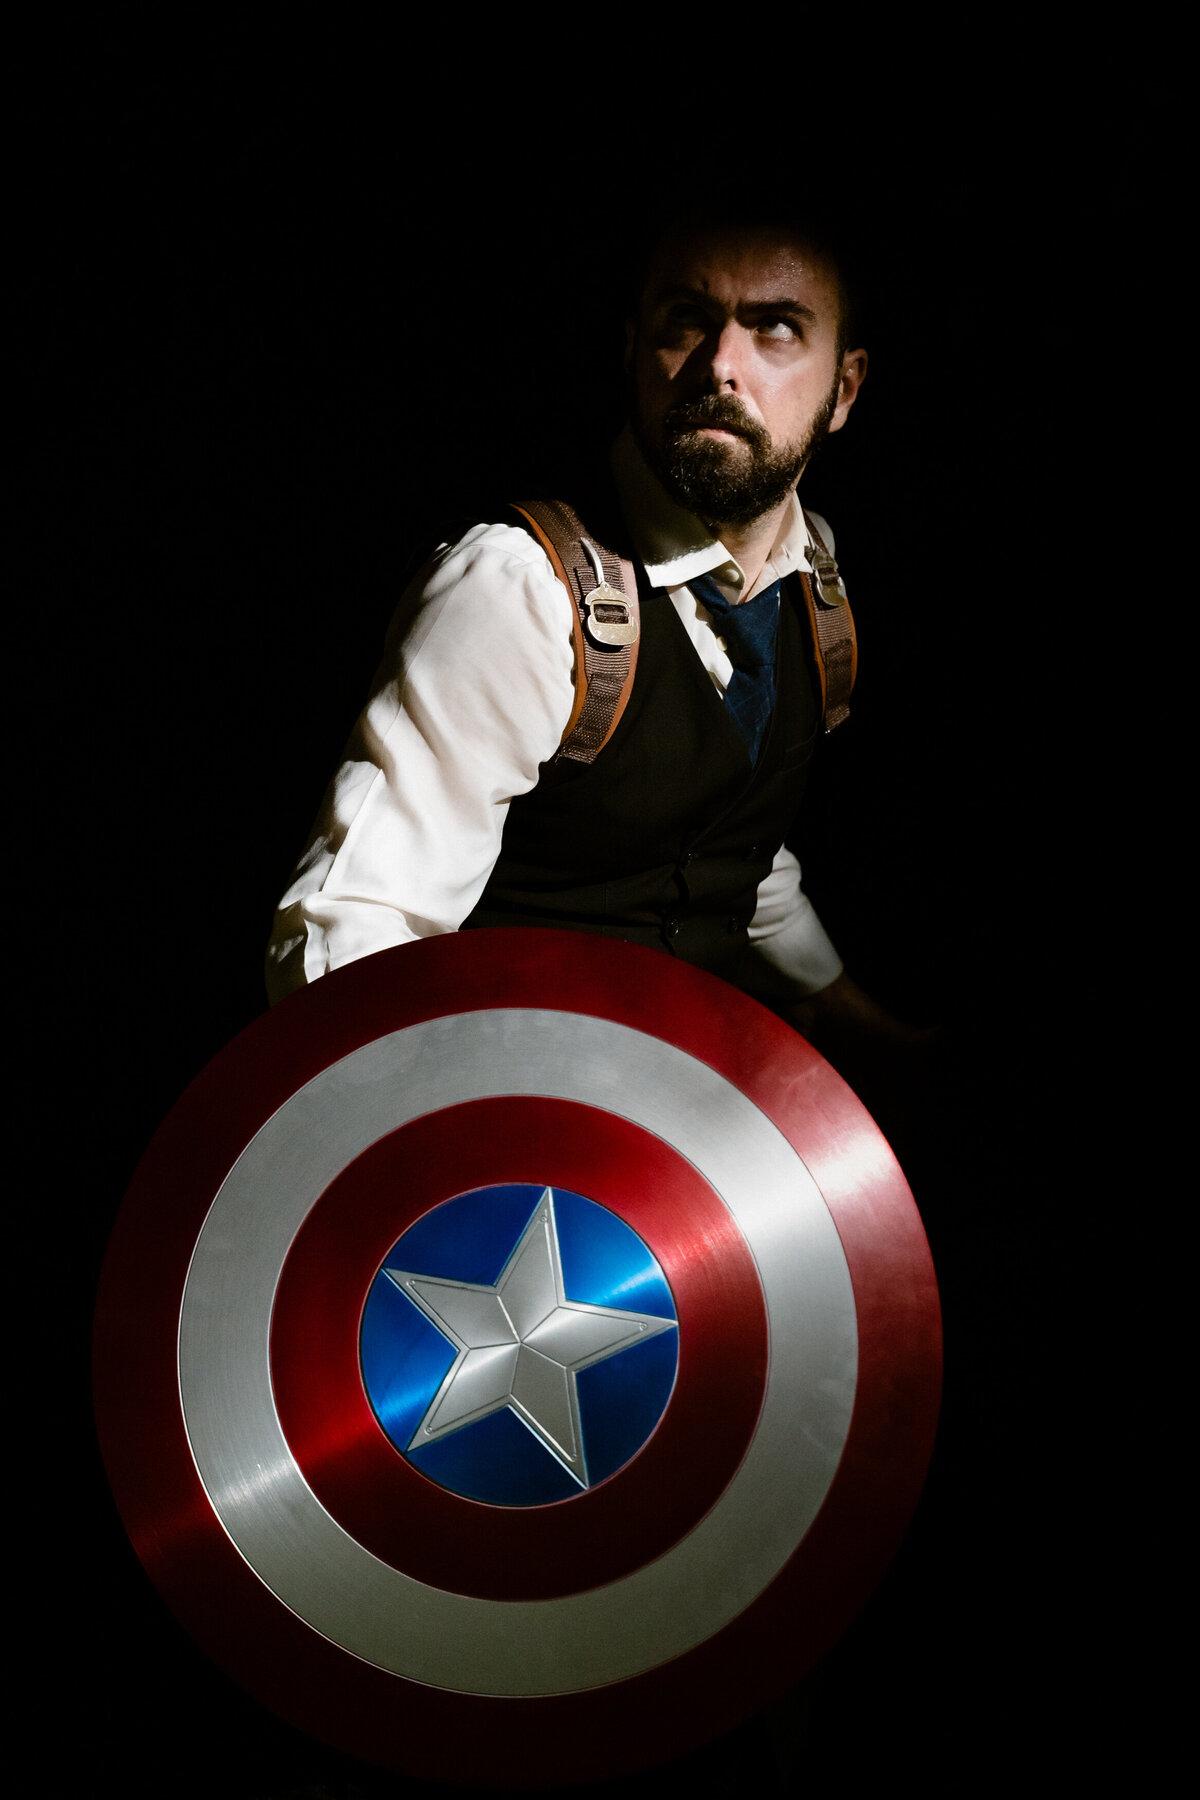 A person in a cosplay outfit of Captain America holding a shield.